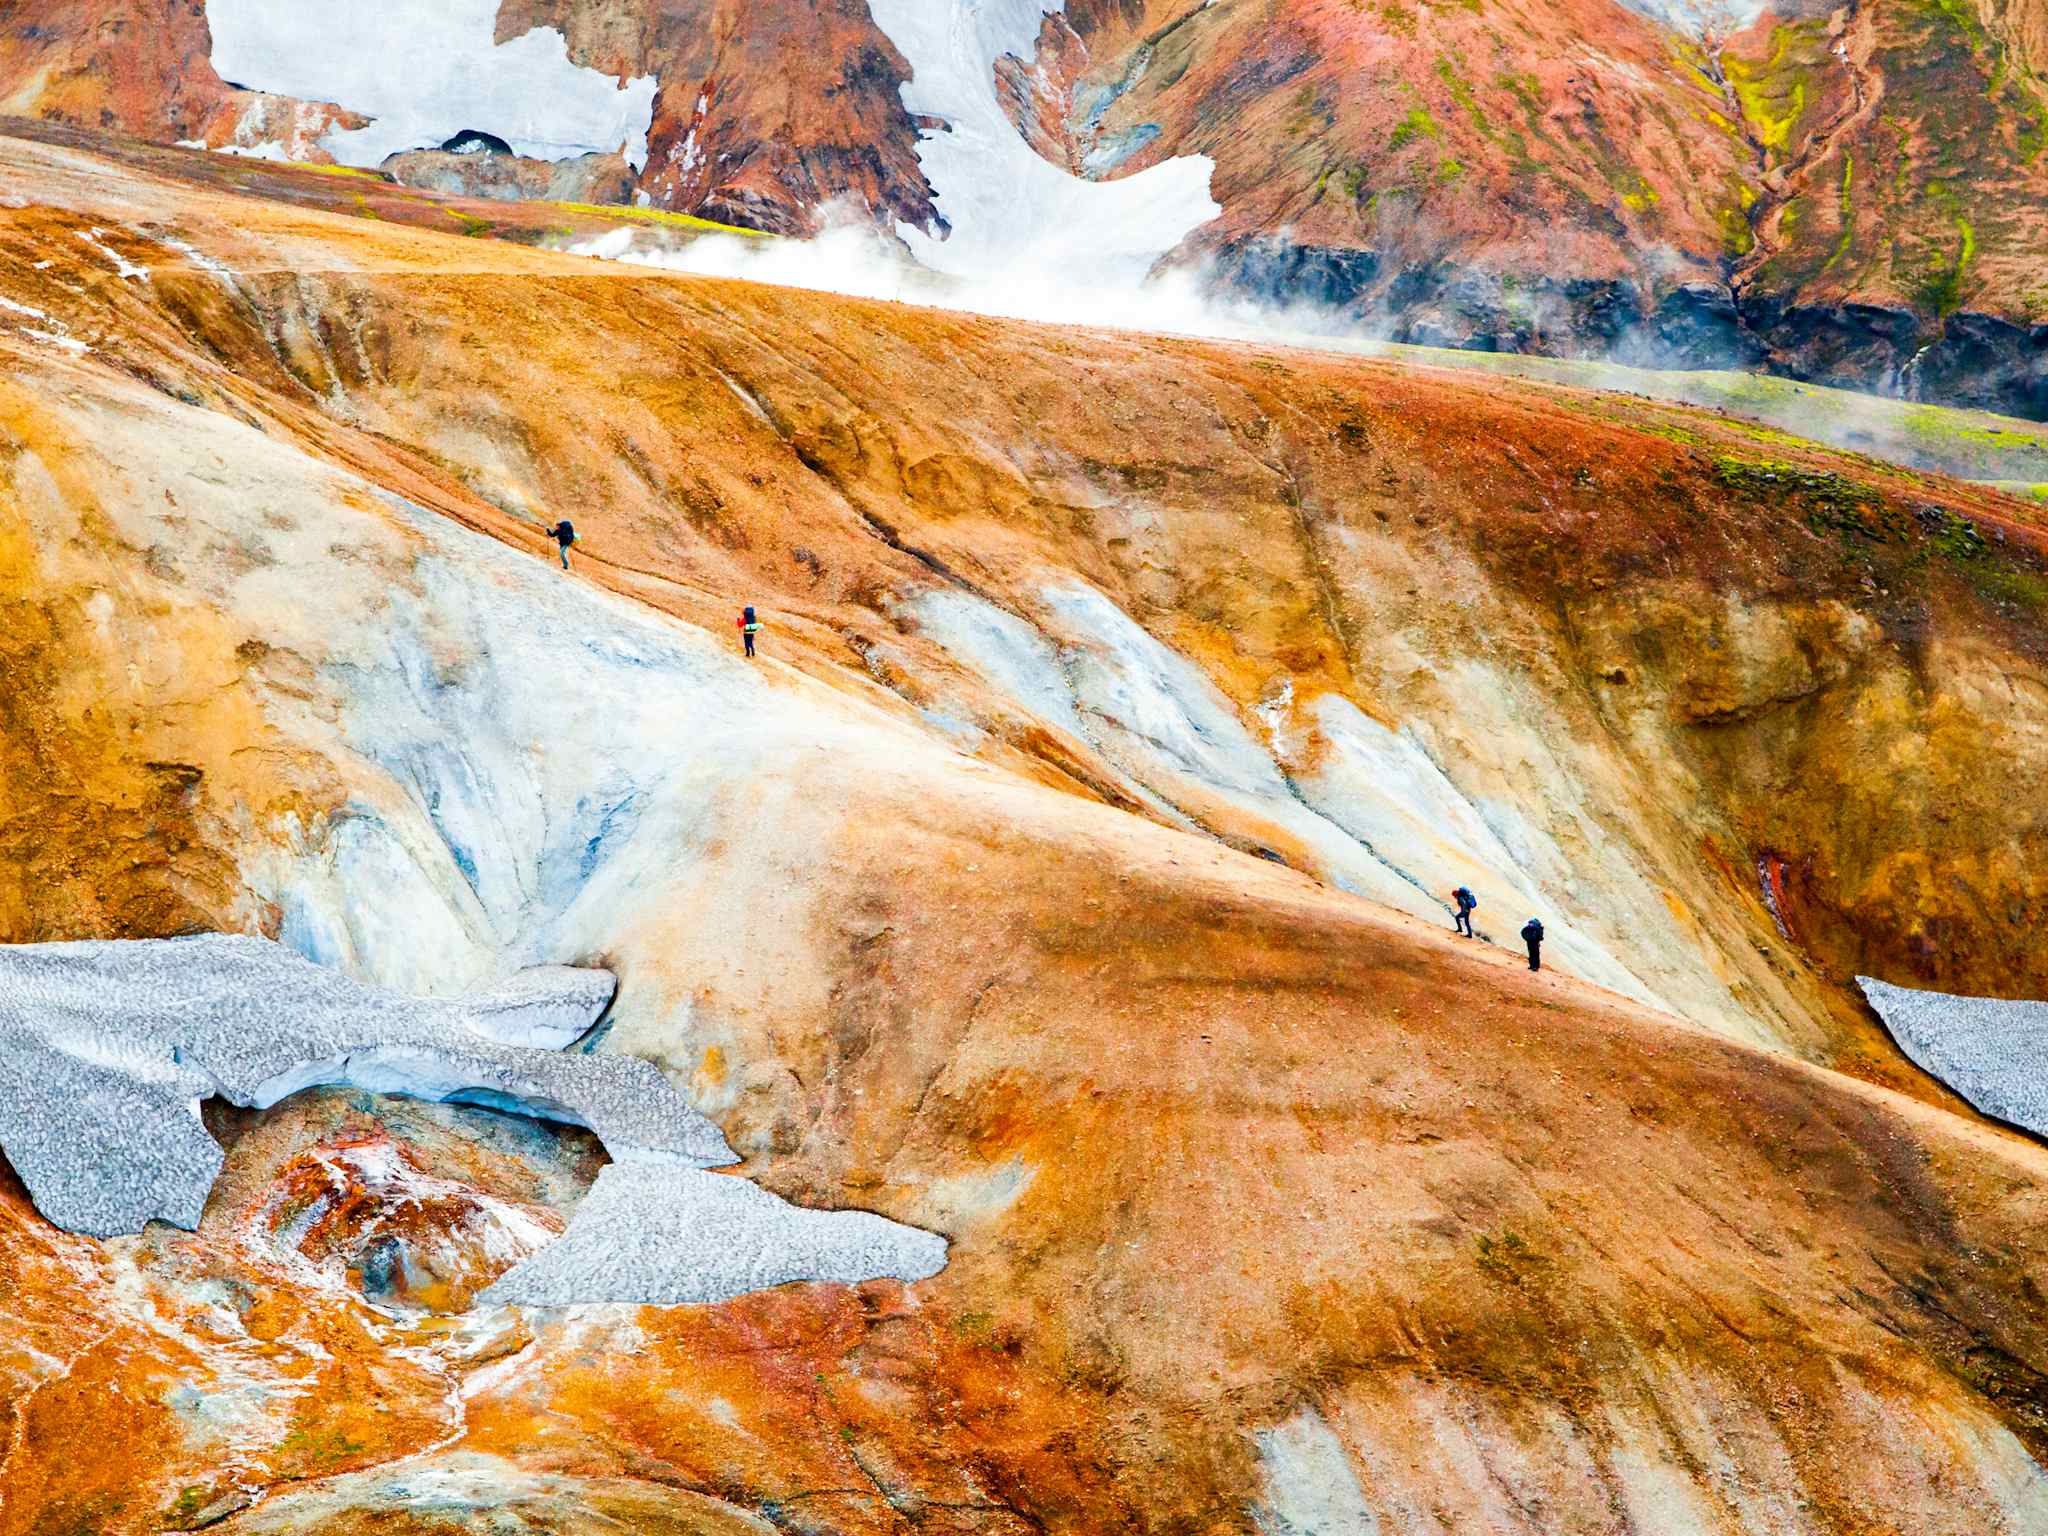 Hikers on the Laugavegur trail in Iceland. Photo: Getty.